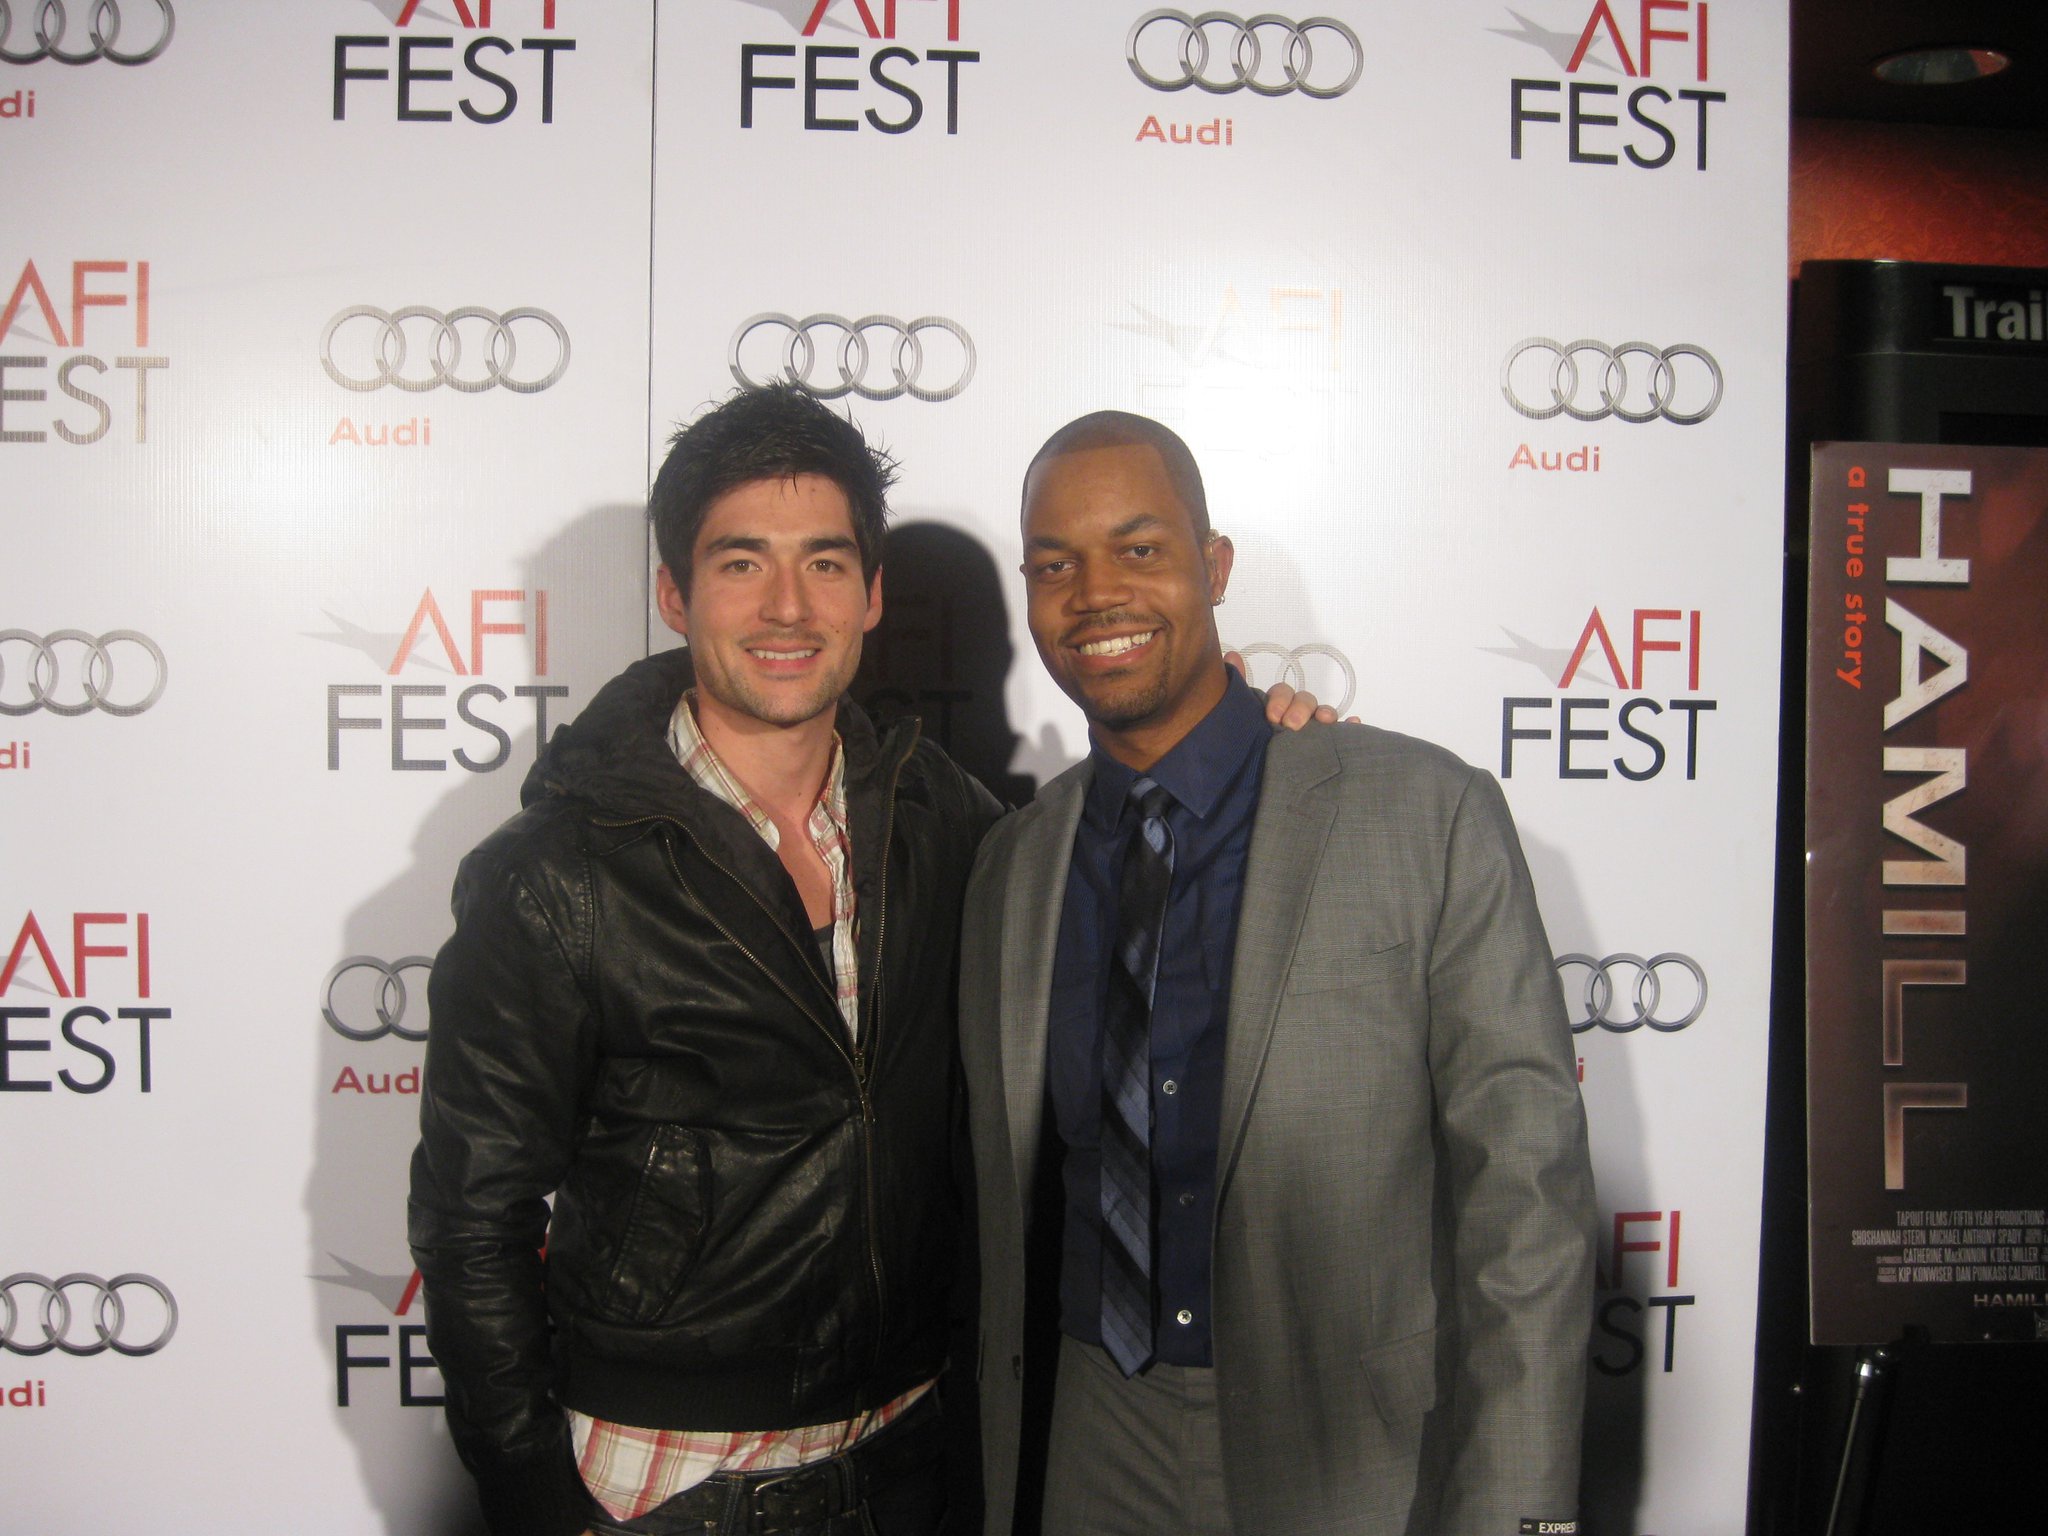 Michael Spady and Daniel Josev at AFI Fest premiere for Hamill